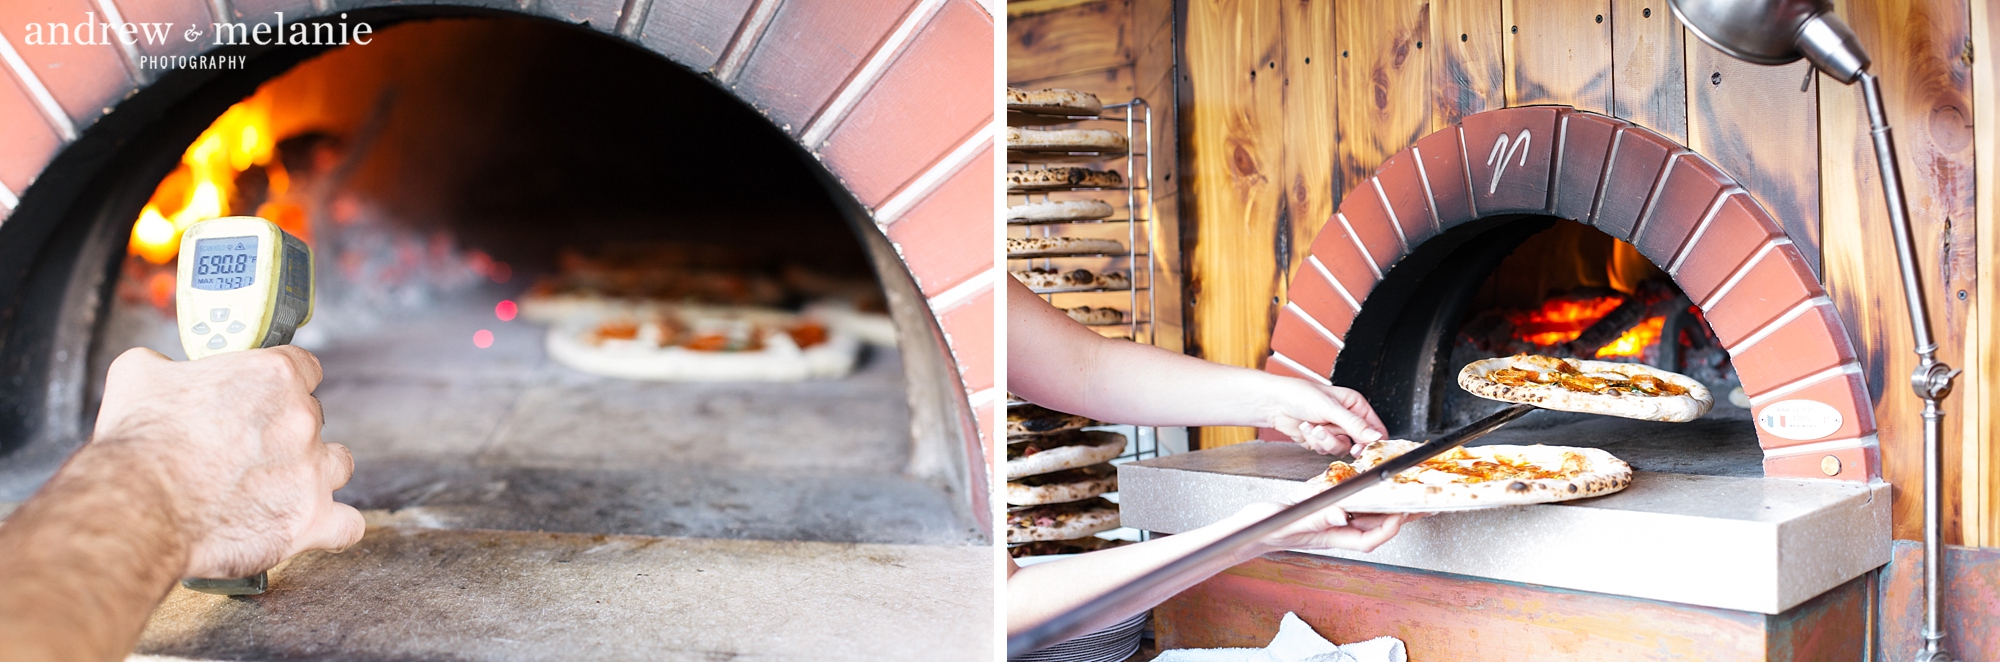 Pizza oven wedding catering